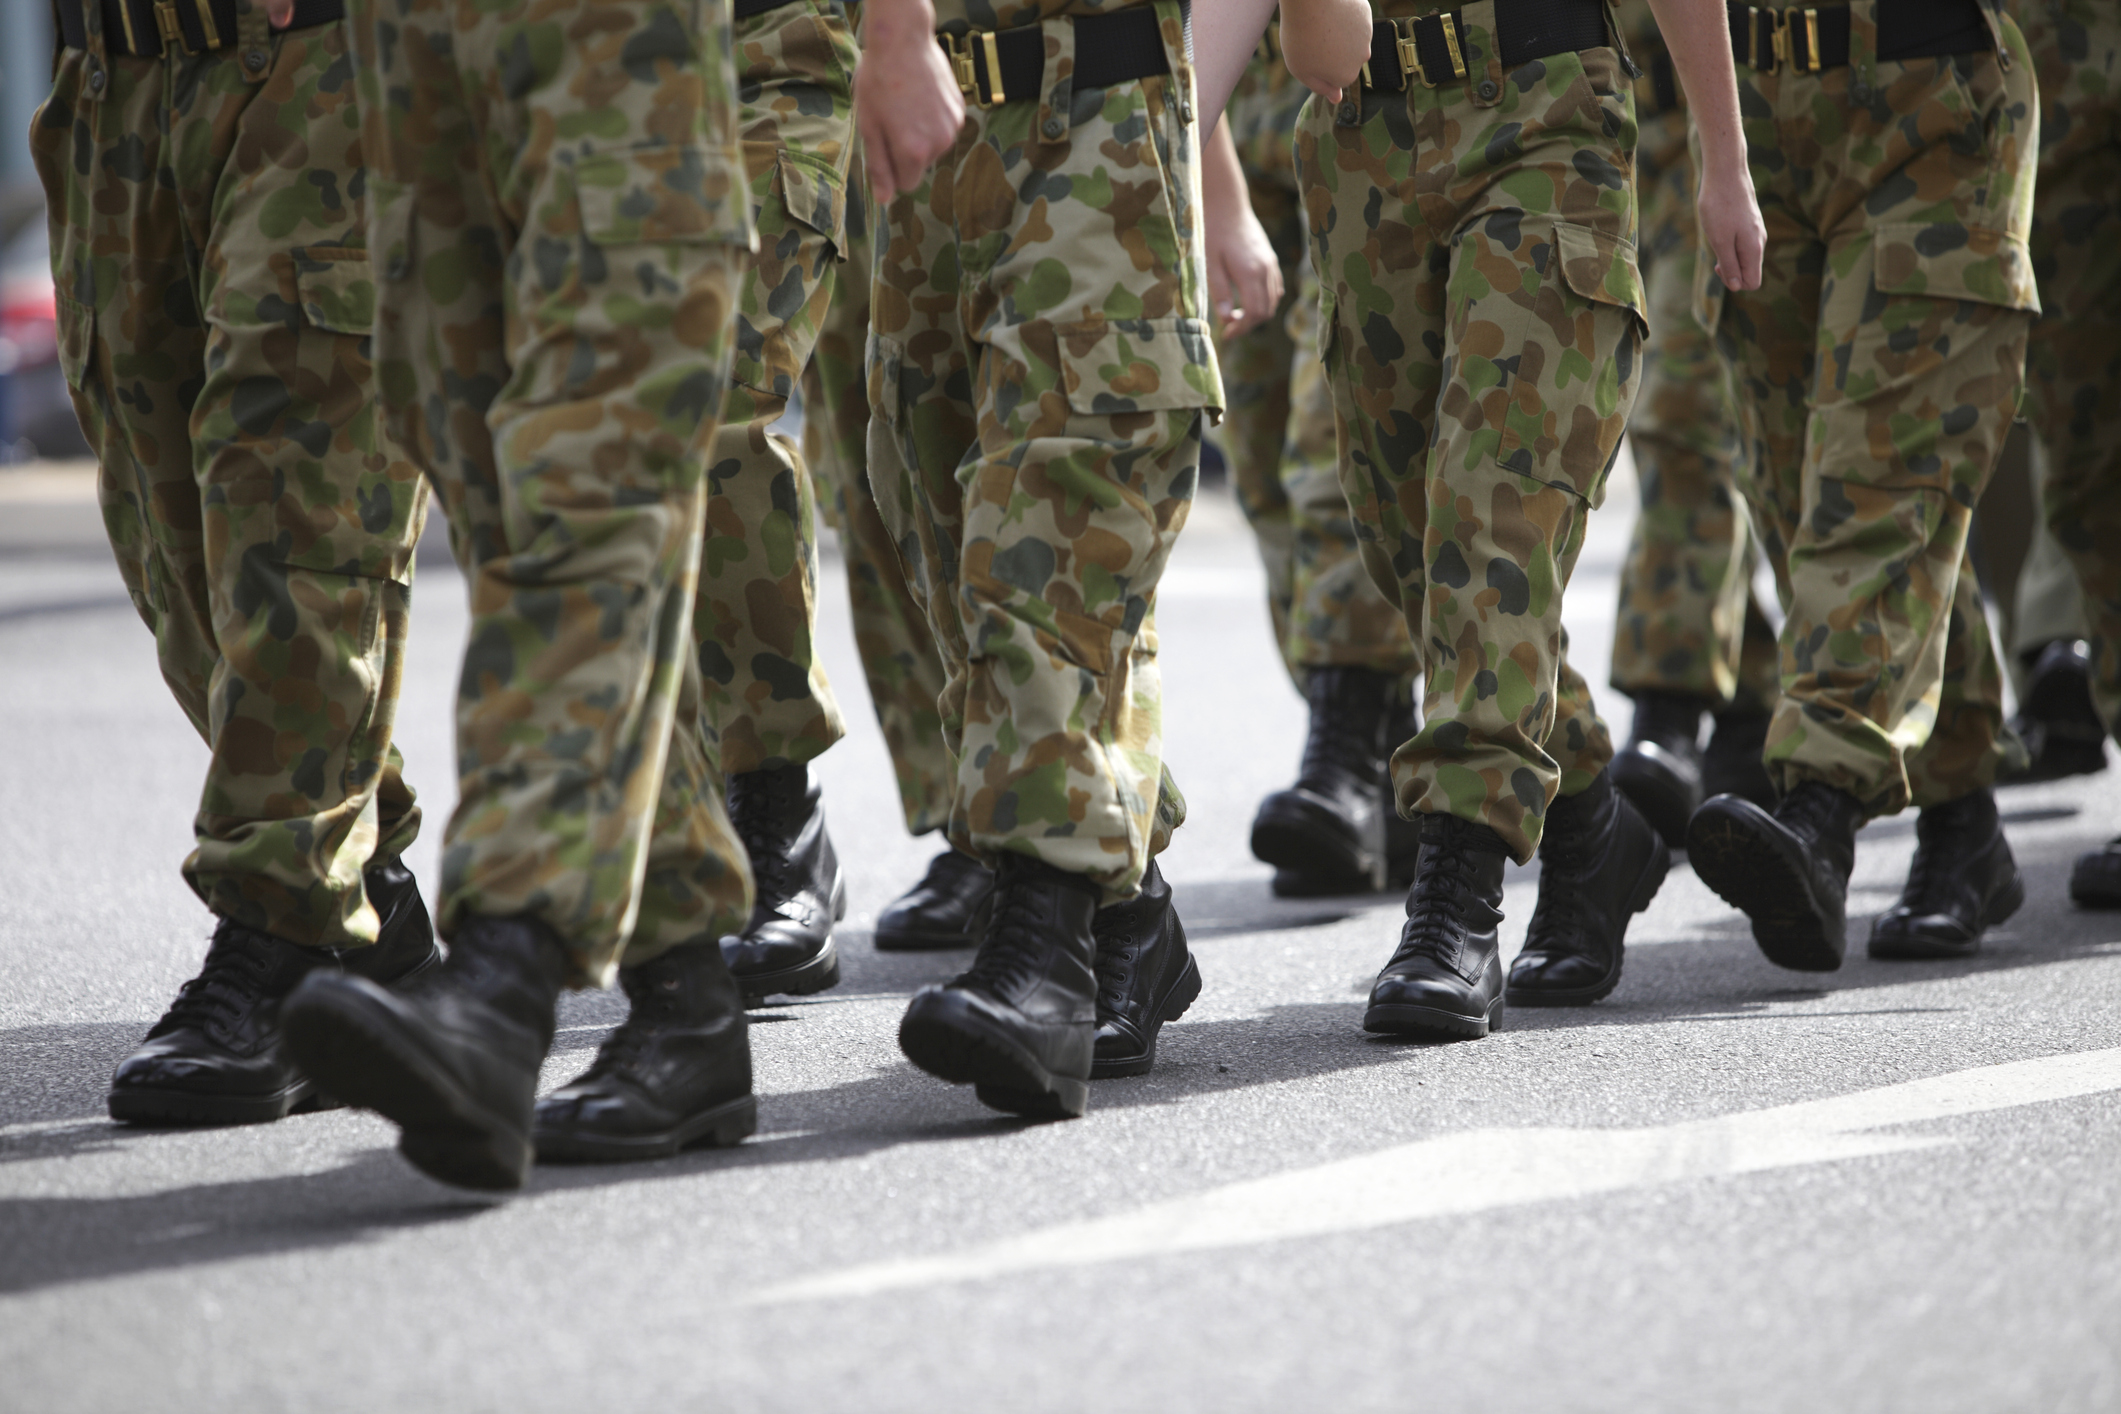 PHOTO: Soldiers in boots are pictured marching in uniform in this undated stock photo.